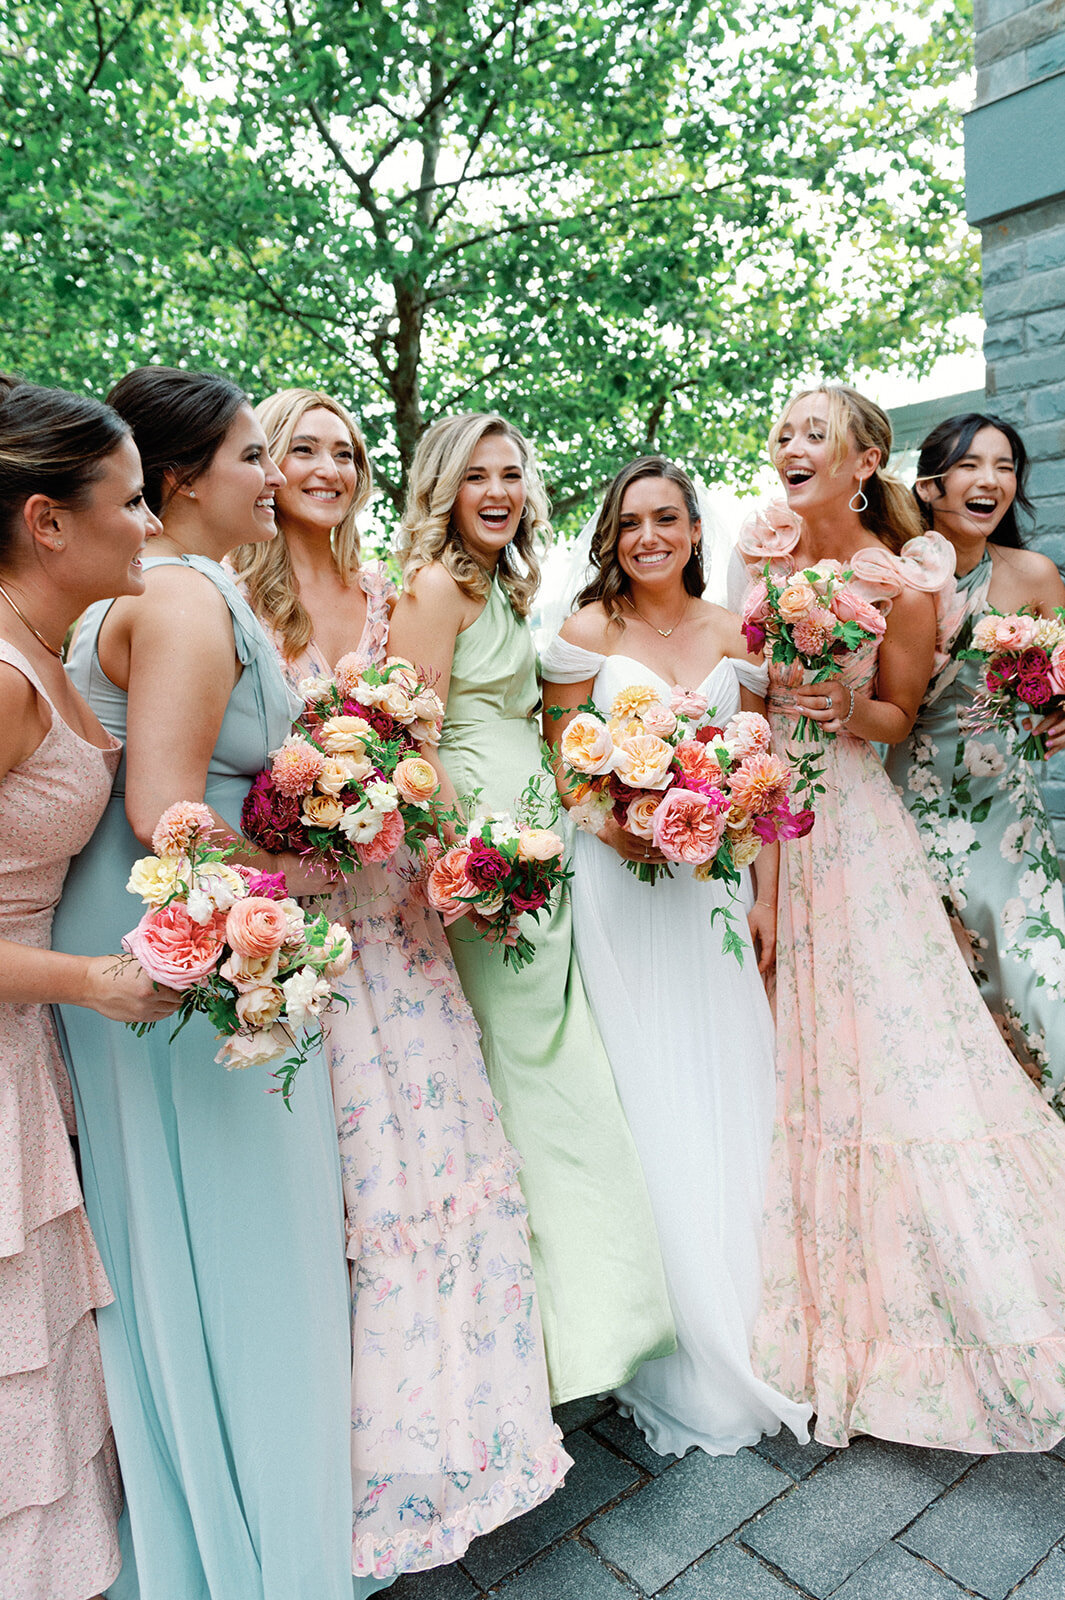 Bridetribe holding their bouquets wearing colorful gowns having fun